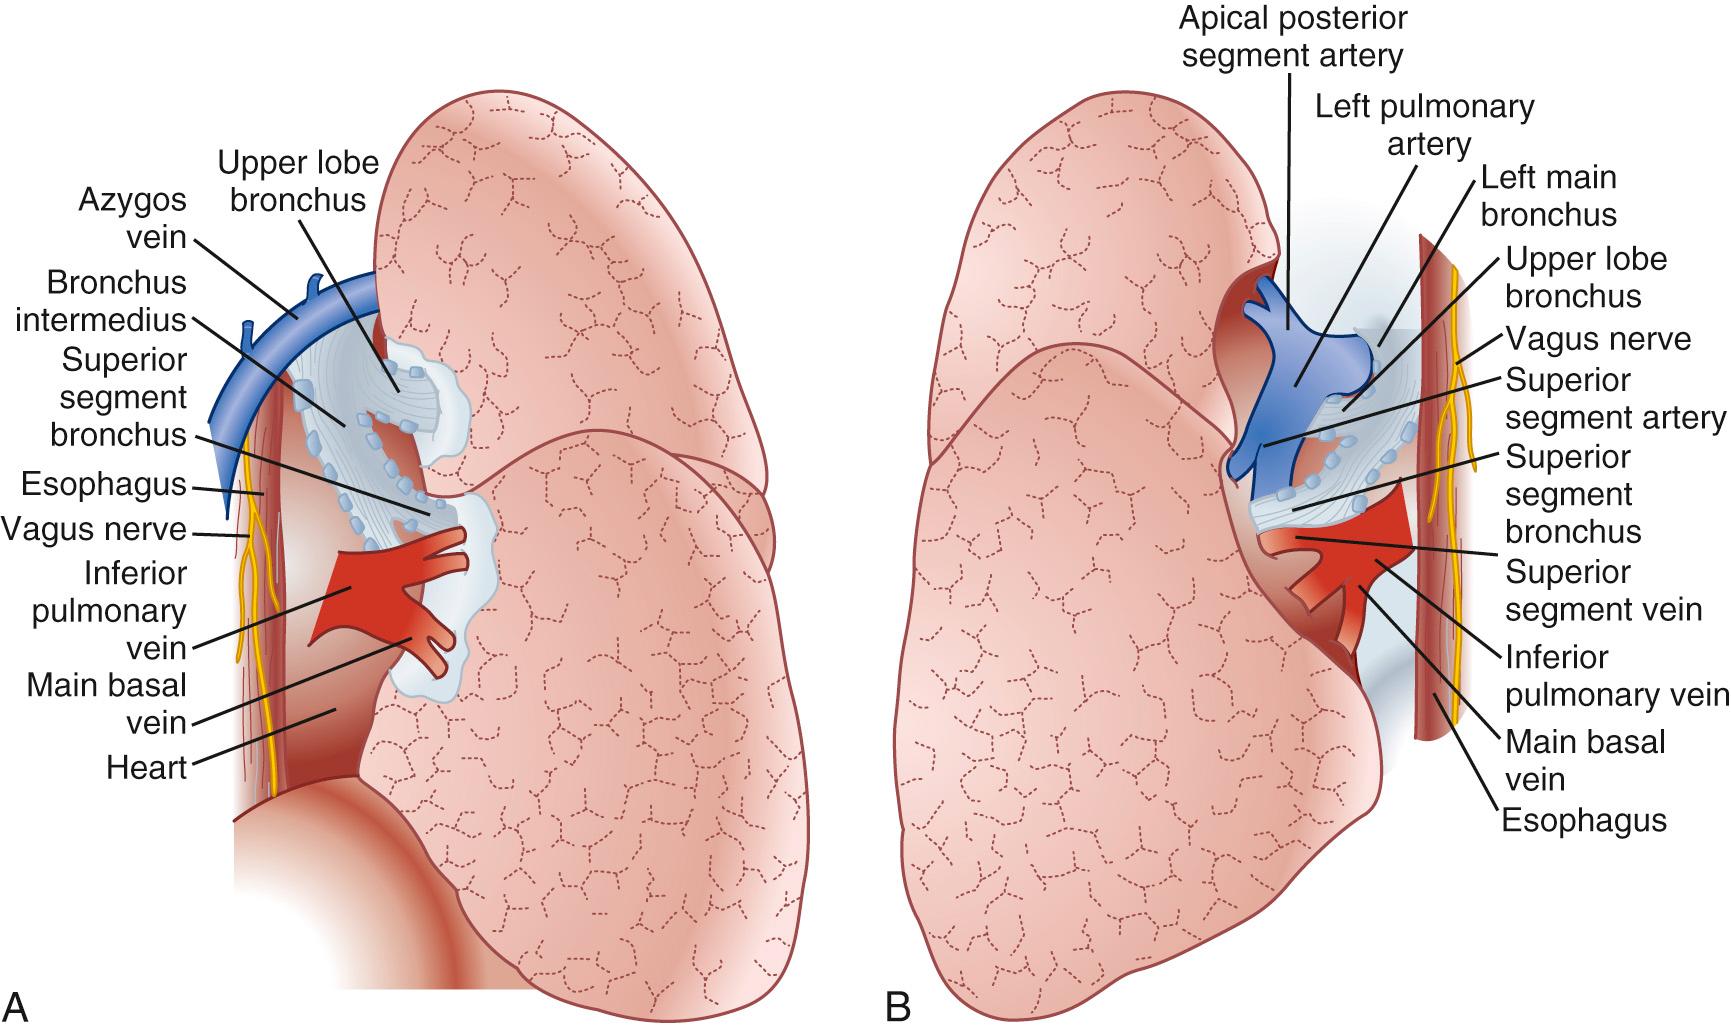 FIGURE 17-1, Posterior views of the right (A) and left (B) pulmonary hila. The mediastinal pleura is opened and the lung retracted anteriorly.